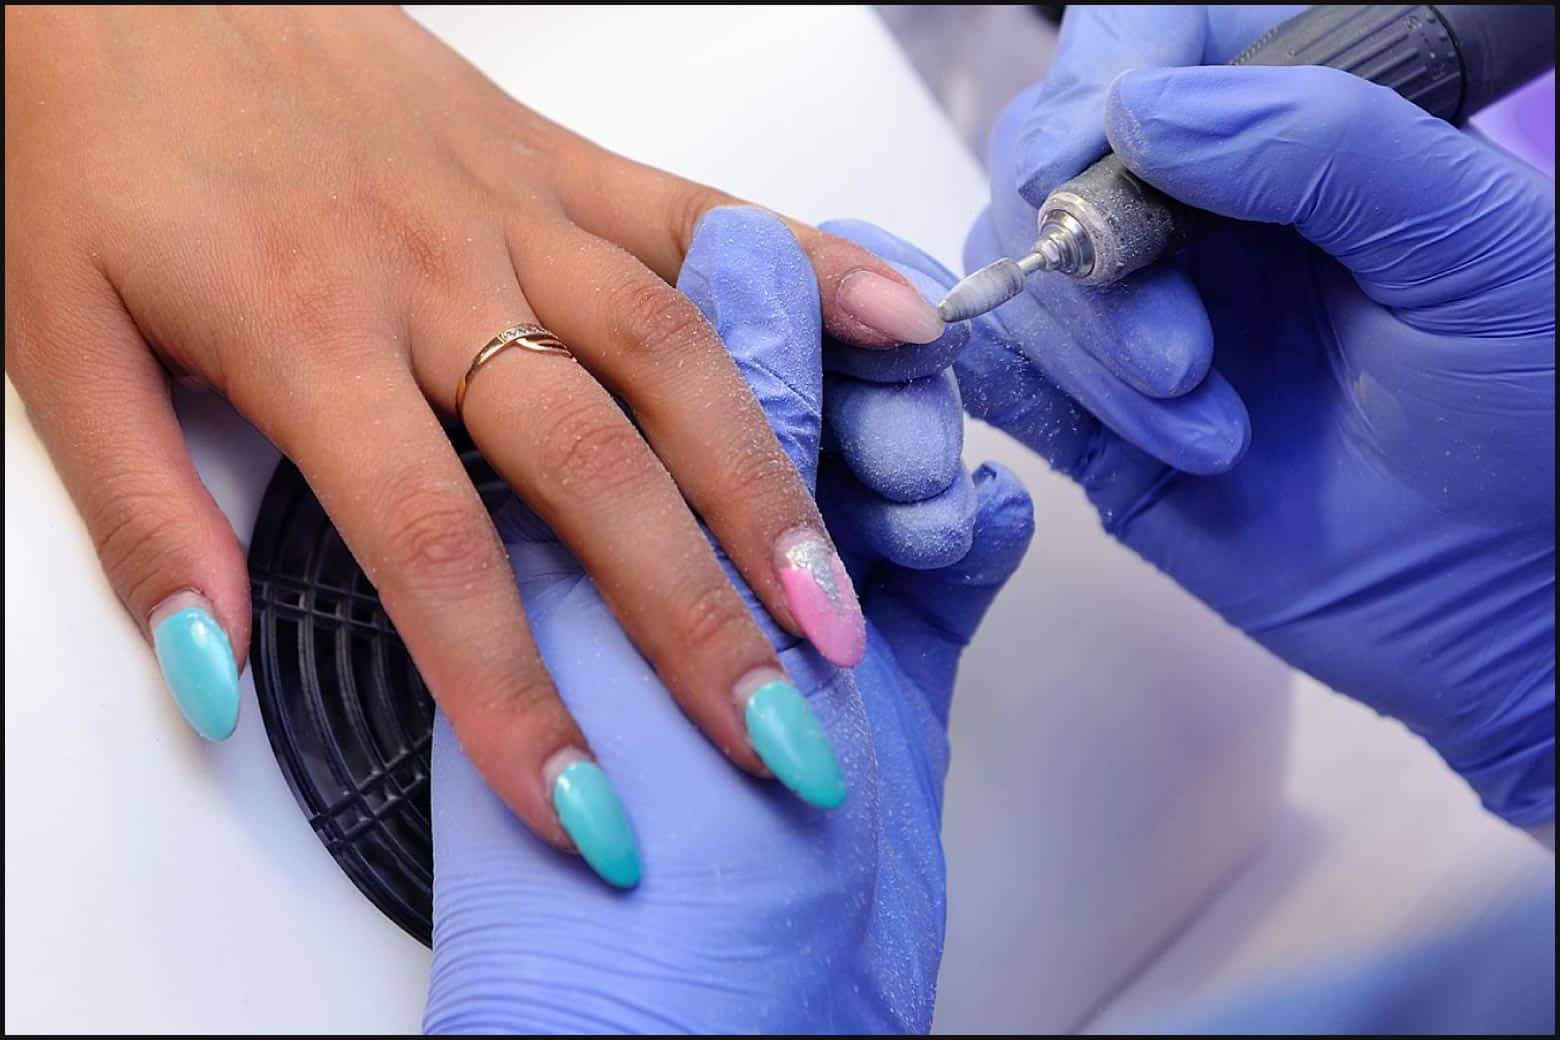 close up of a nail tech wearing blue latex gloves and removing acrylic nails from a hand with blue, pink, and glittery nails